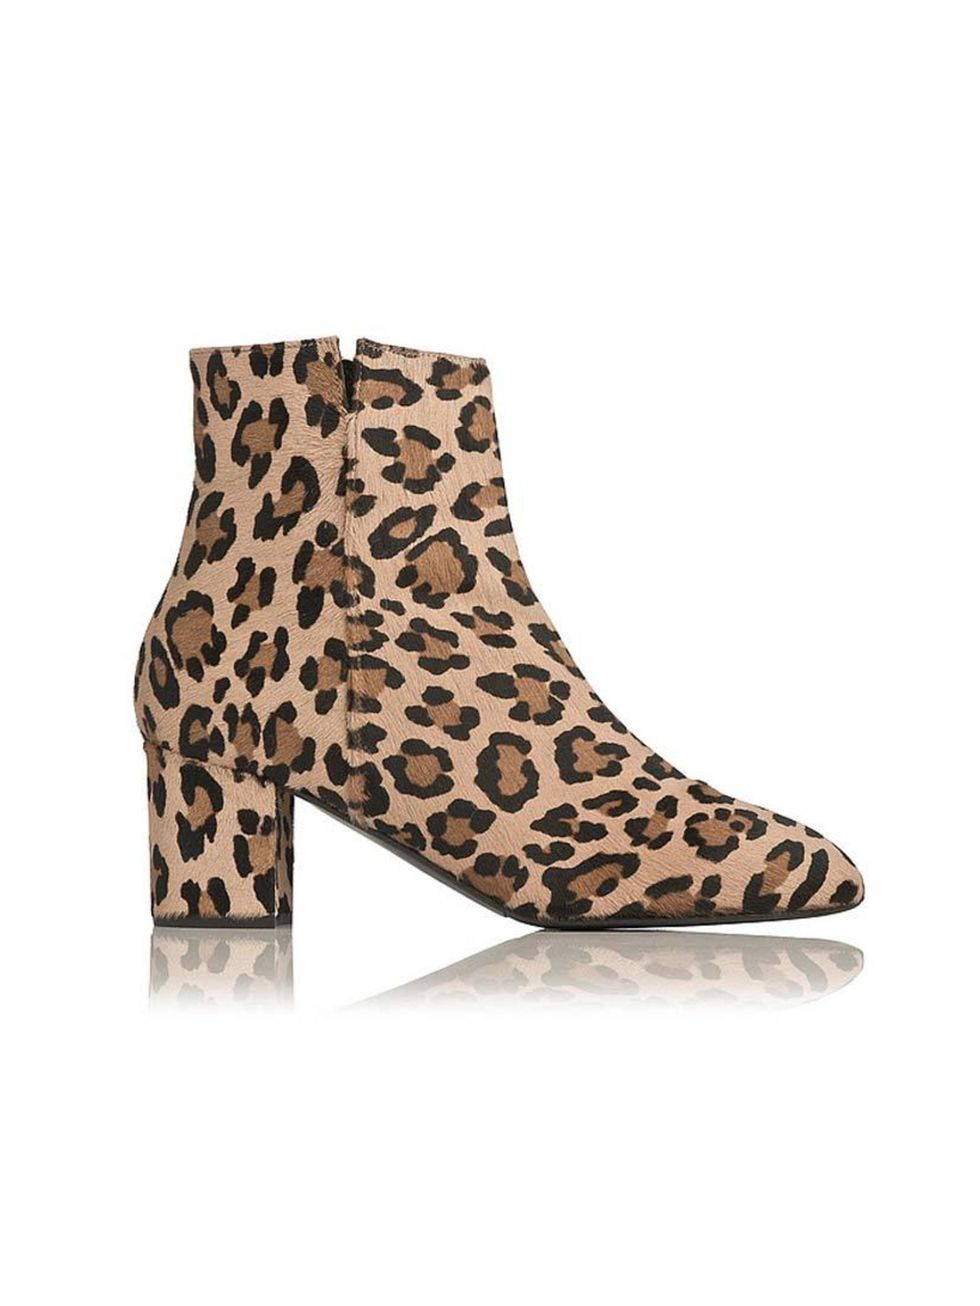 <p>Bored of wearing black? Swap your winter boots for these leopard print fellas, and give your whole wardrobe a lift.</p>

<p><a href="http://www.lkbennett.com/Shoes/Boots/Simi-Haircalf-Ankle-Boot/p/SBSIMIHAIRCALFPrintedLeopard" target="_blank">L.K. Benn